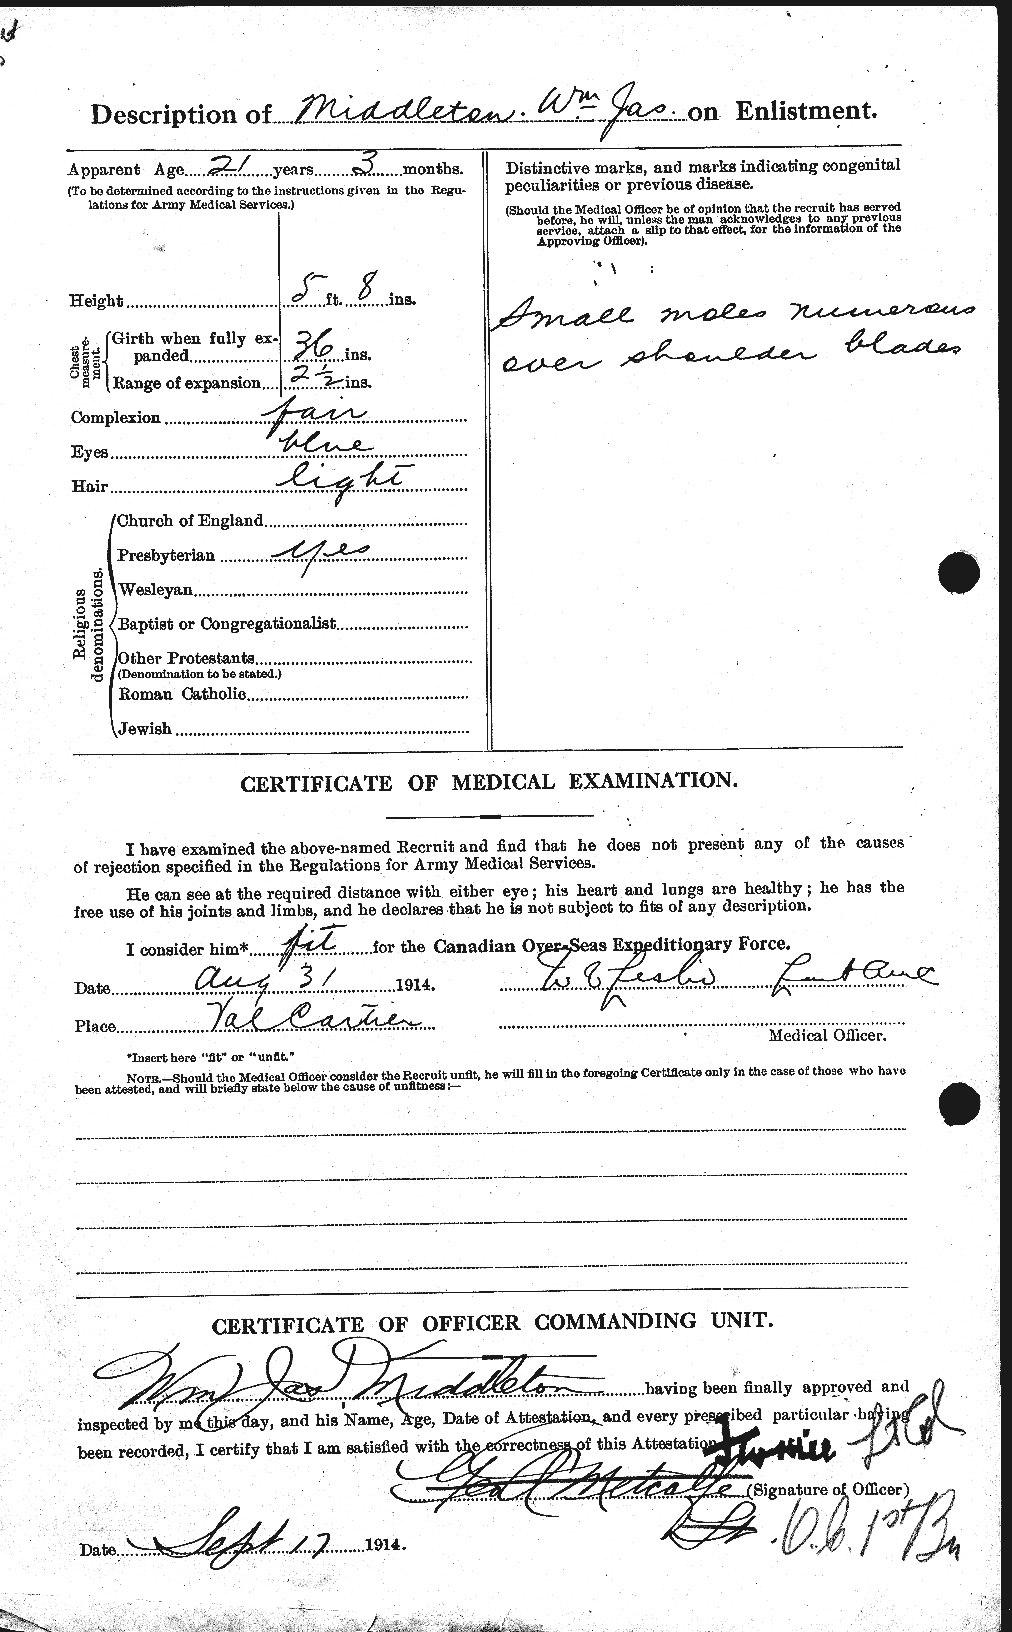 Personnel Records of the First World War - CEF 494375b